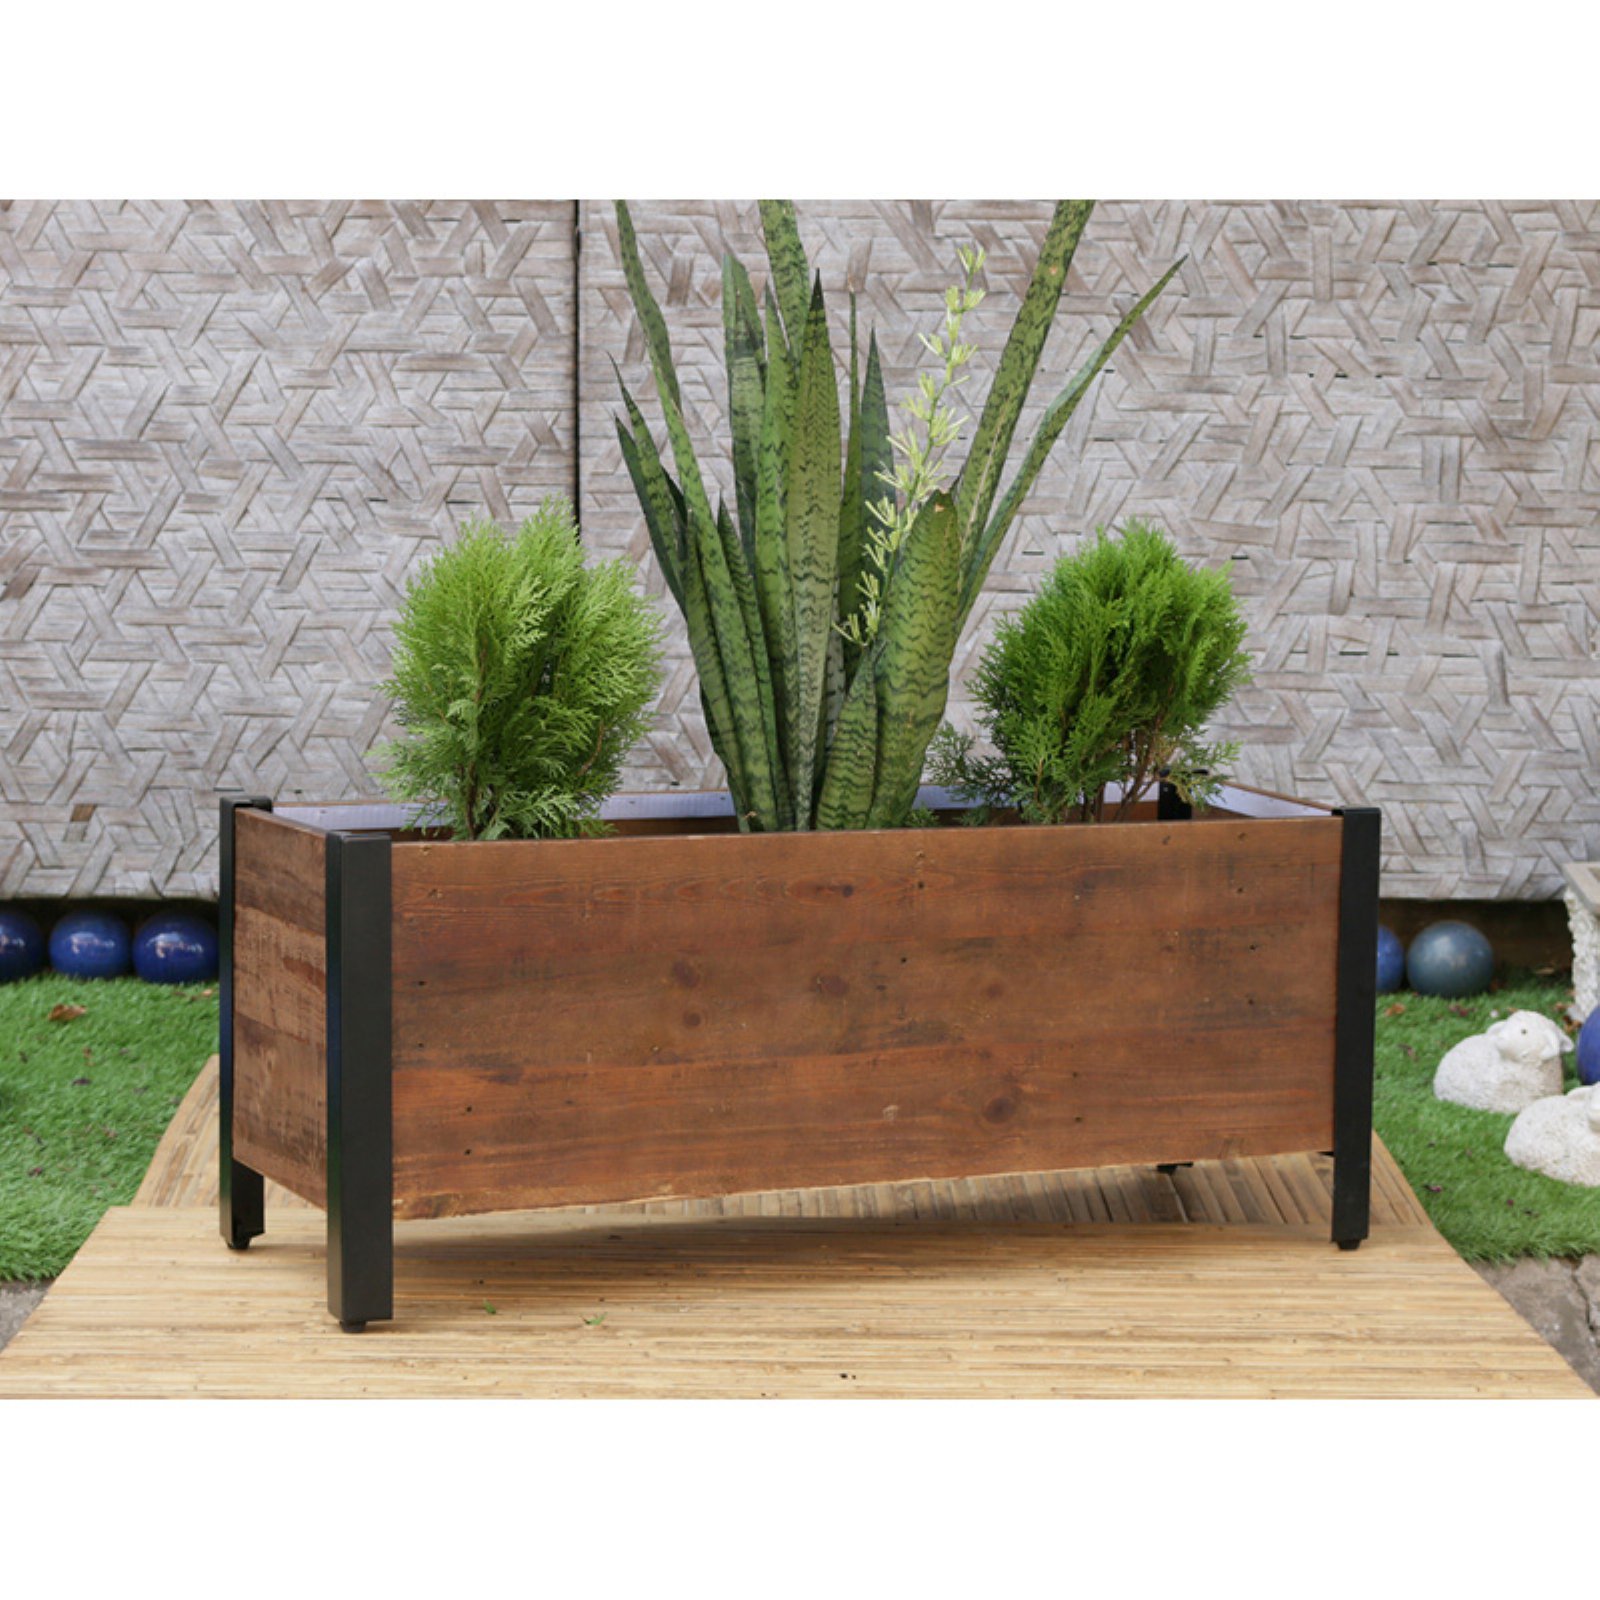 Make your garden luxuries and beautiful with wooden planter boxes